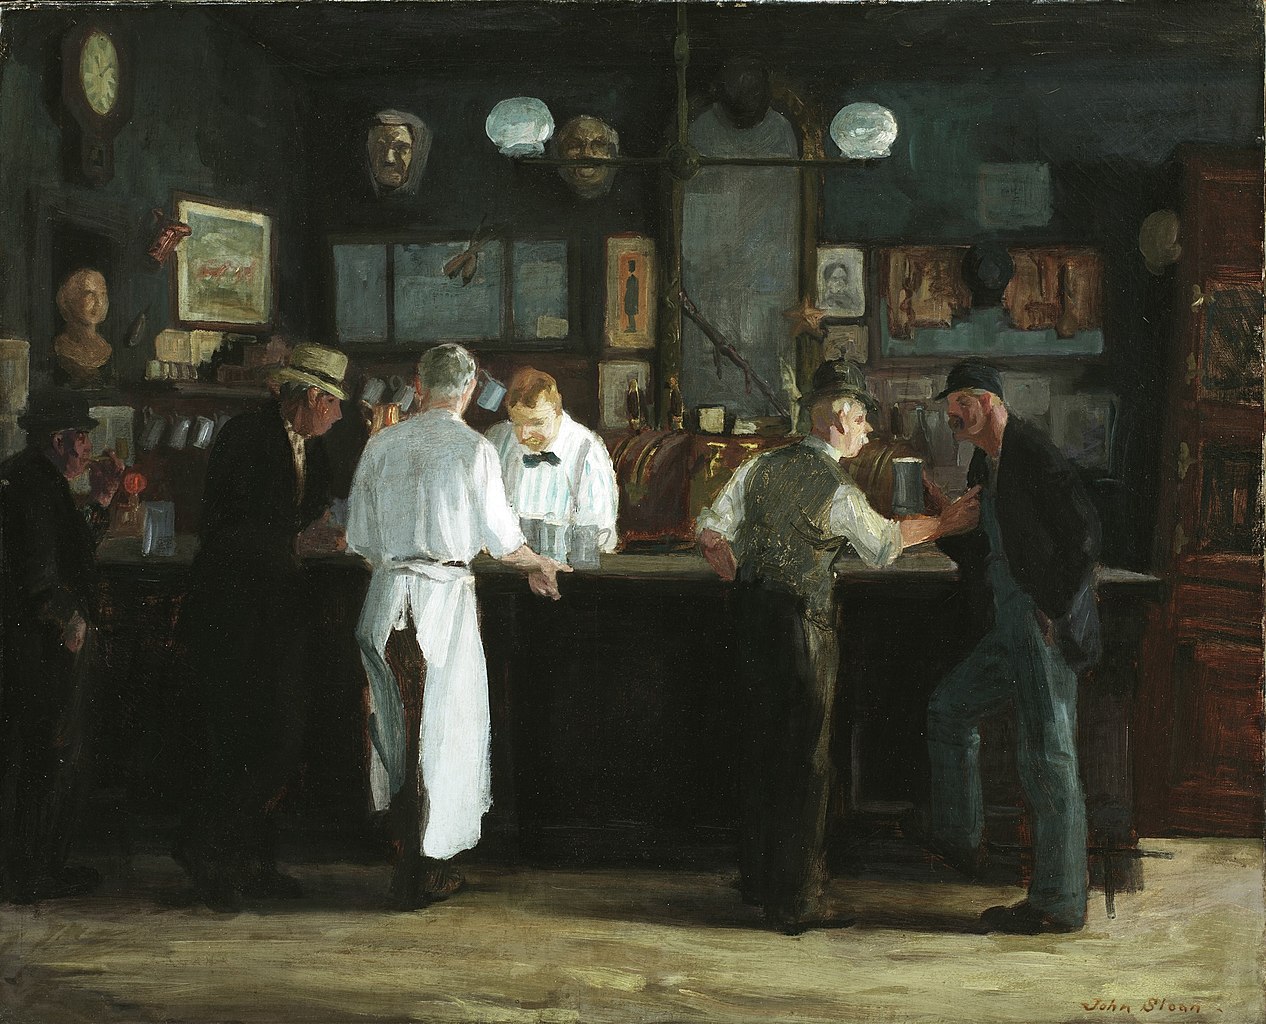 Painting of McSorley’s Bar by John French Sloan